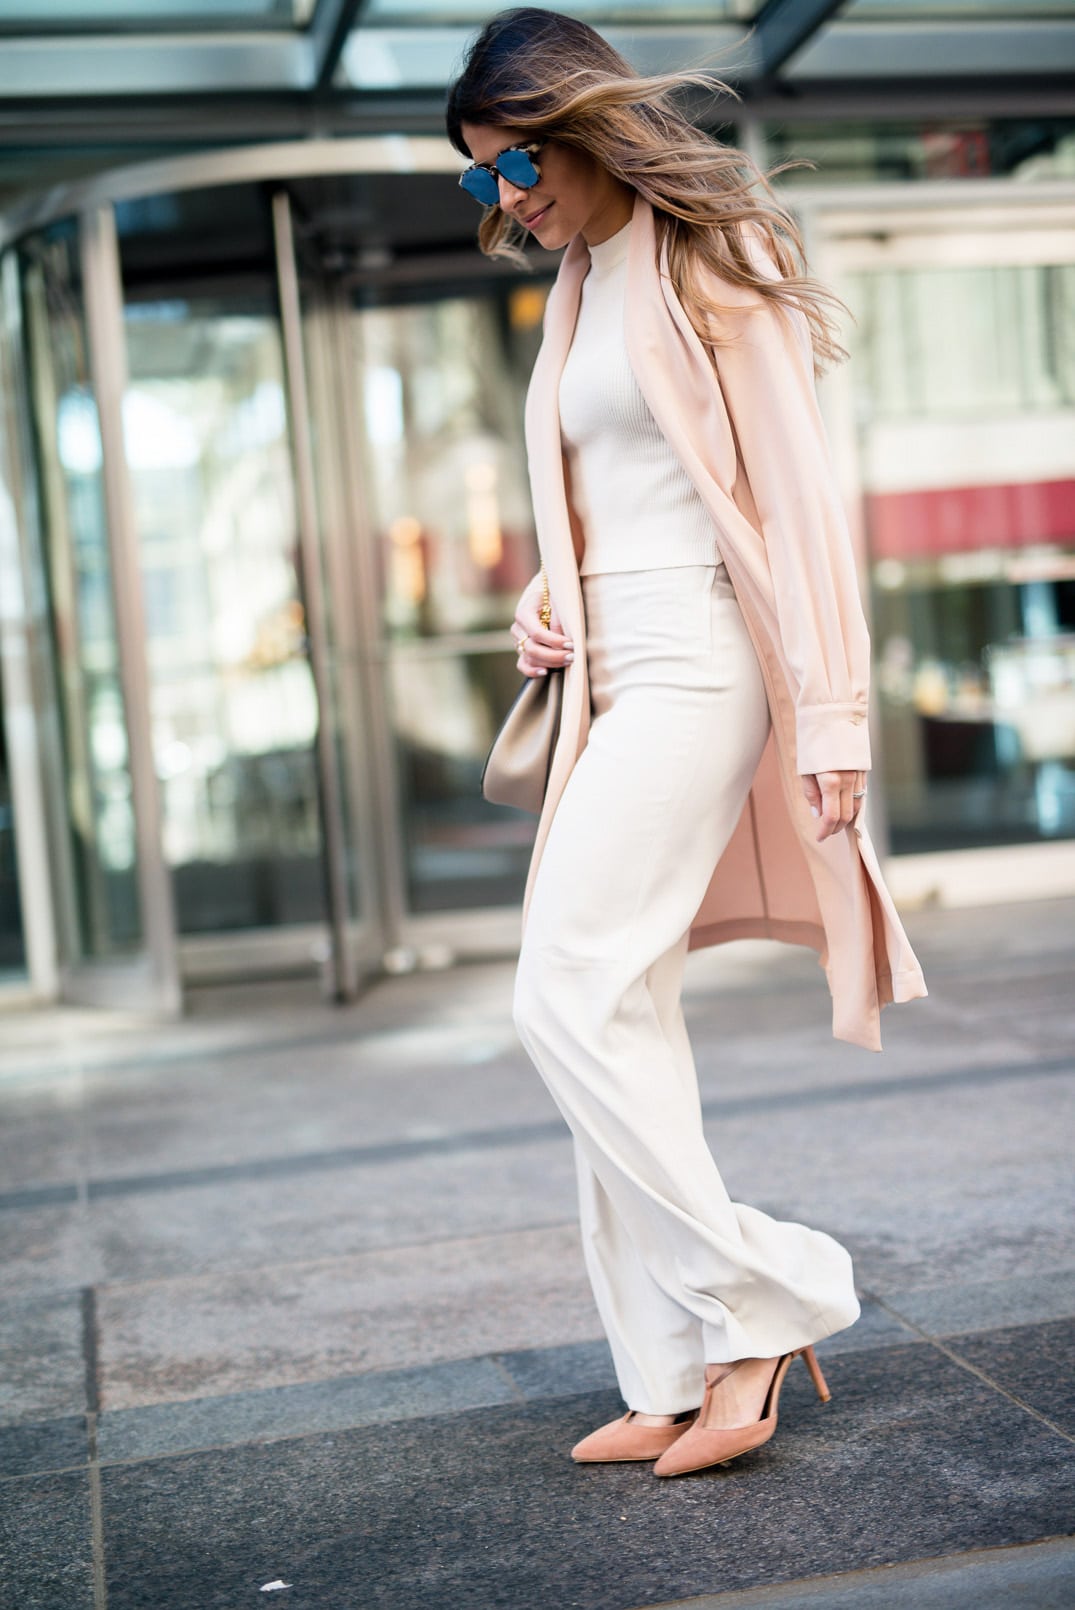 Pam Hetlinger wearing a Mango blush jacket, reiss lace up pumps, h&m high waisted white pants, h&m white crop top sweater, dior sunglasses, and chloe drew bag.